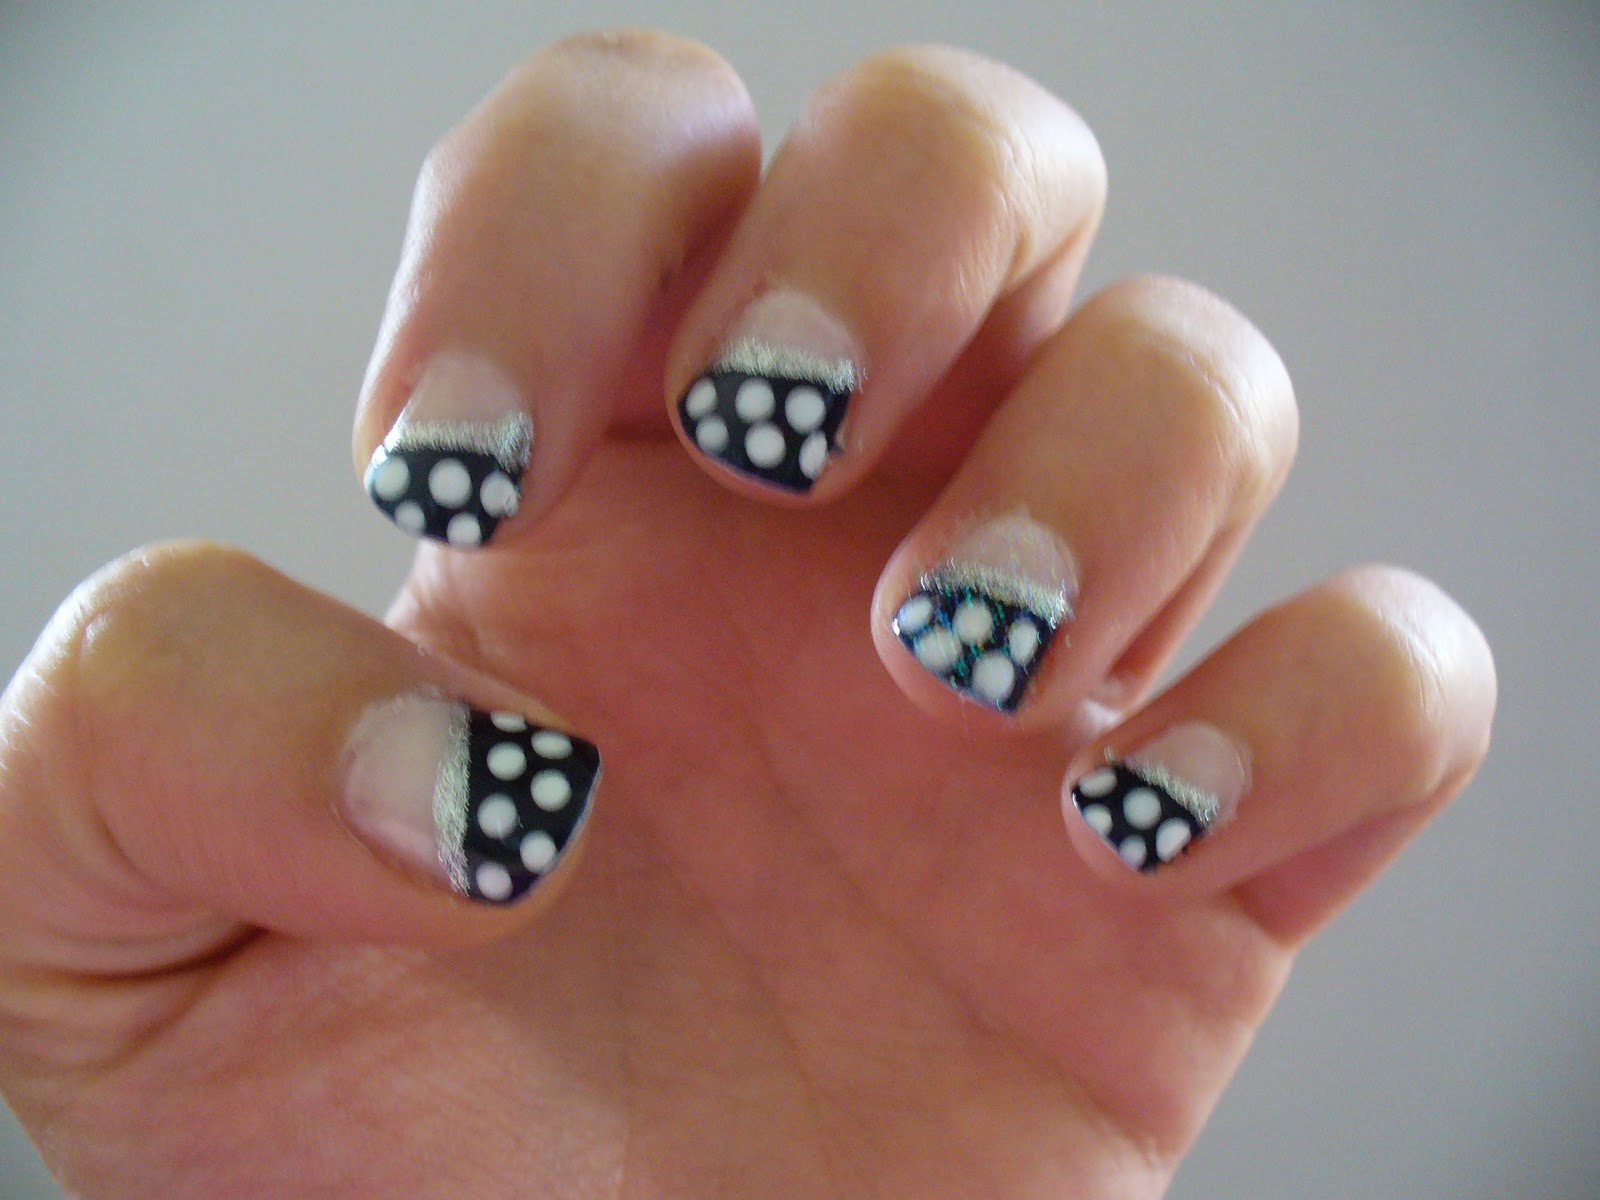 3. 10 Simple and Adorable Nail Art Ideas - wide 8